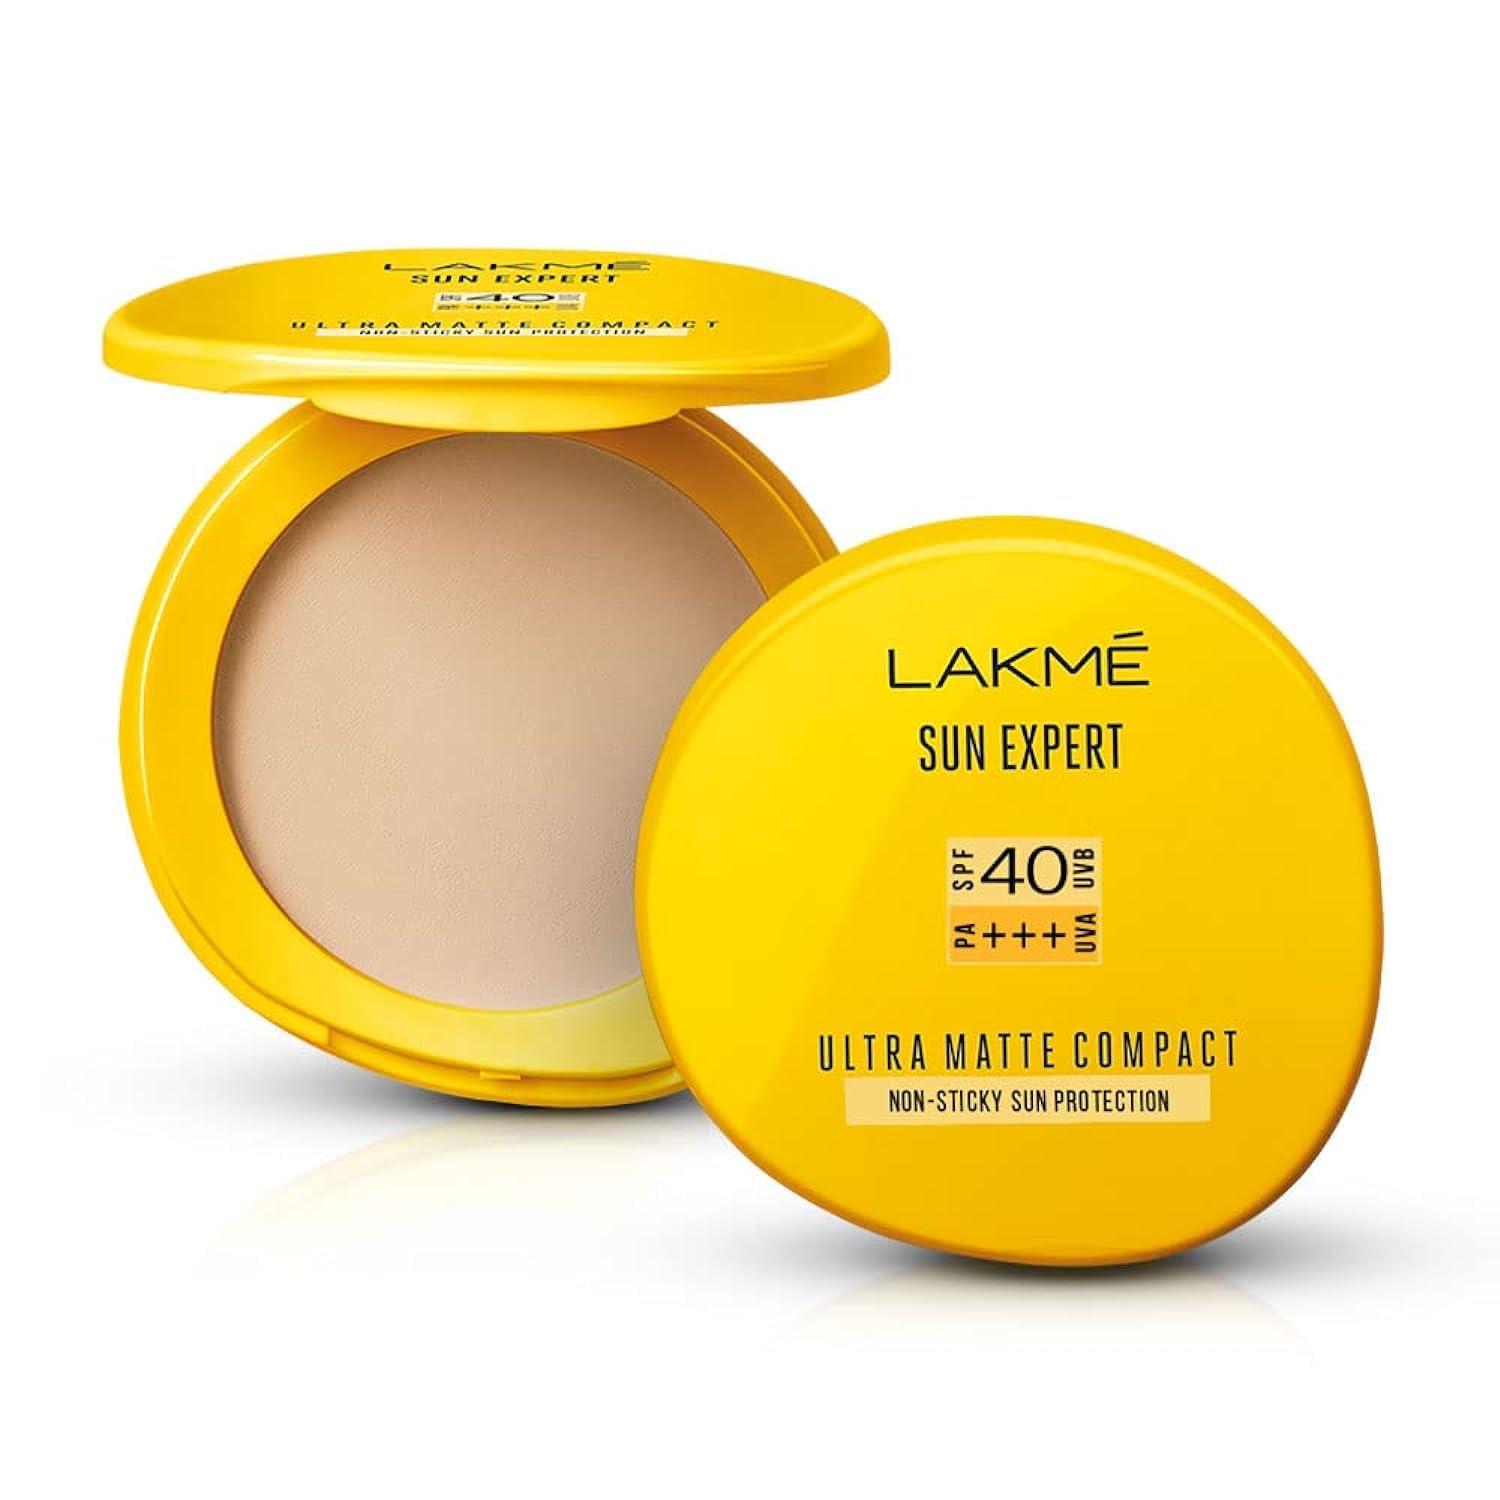 lakme-sun-expert-ultra-matte-spf-40-pa+++-compact,-non-greasy-non-sticky,-for-indian-skin,-gives-even-tone-complexion,-7-g